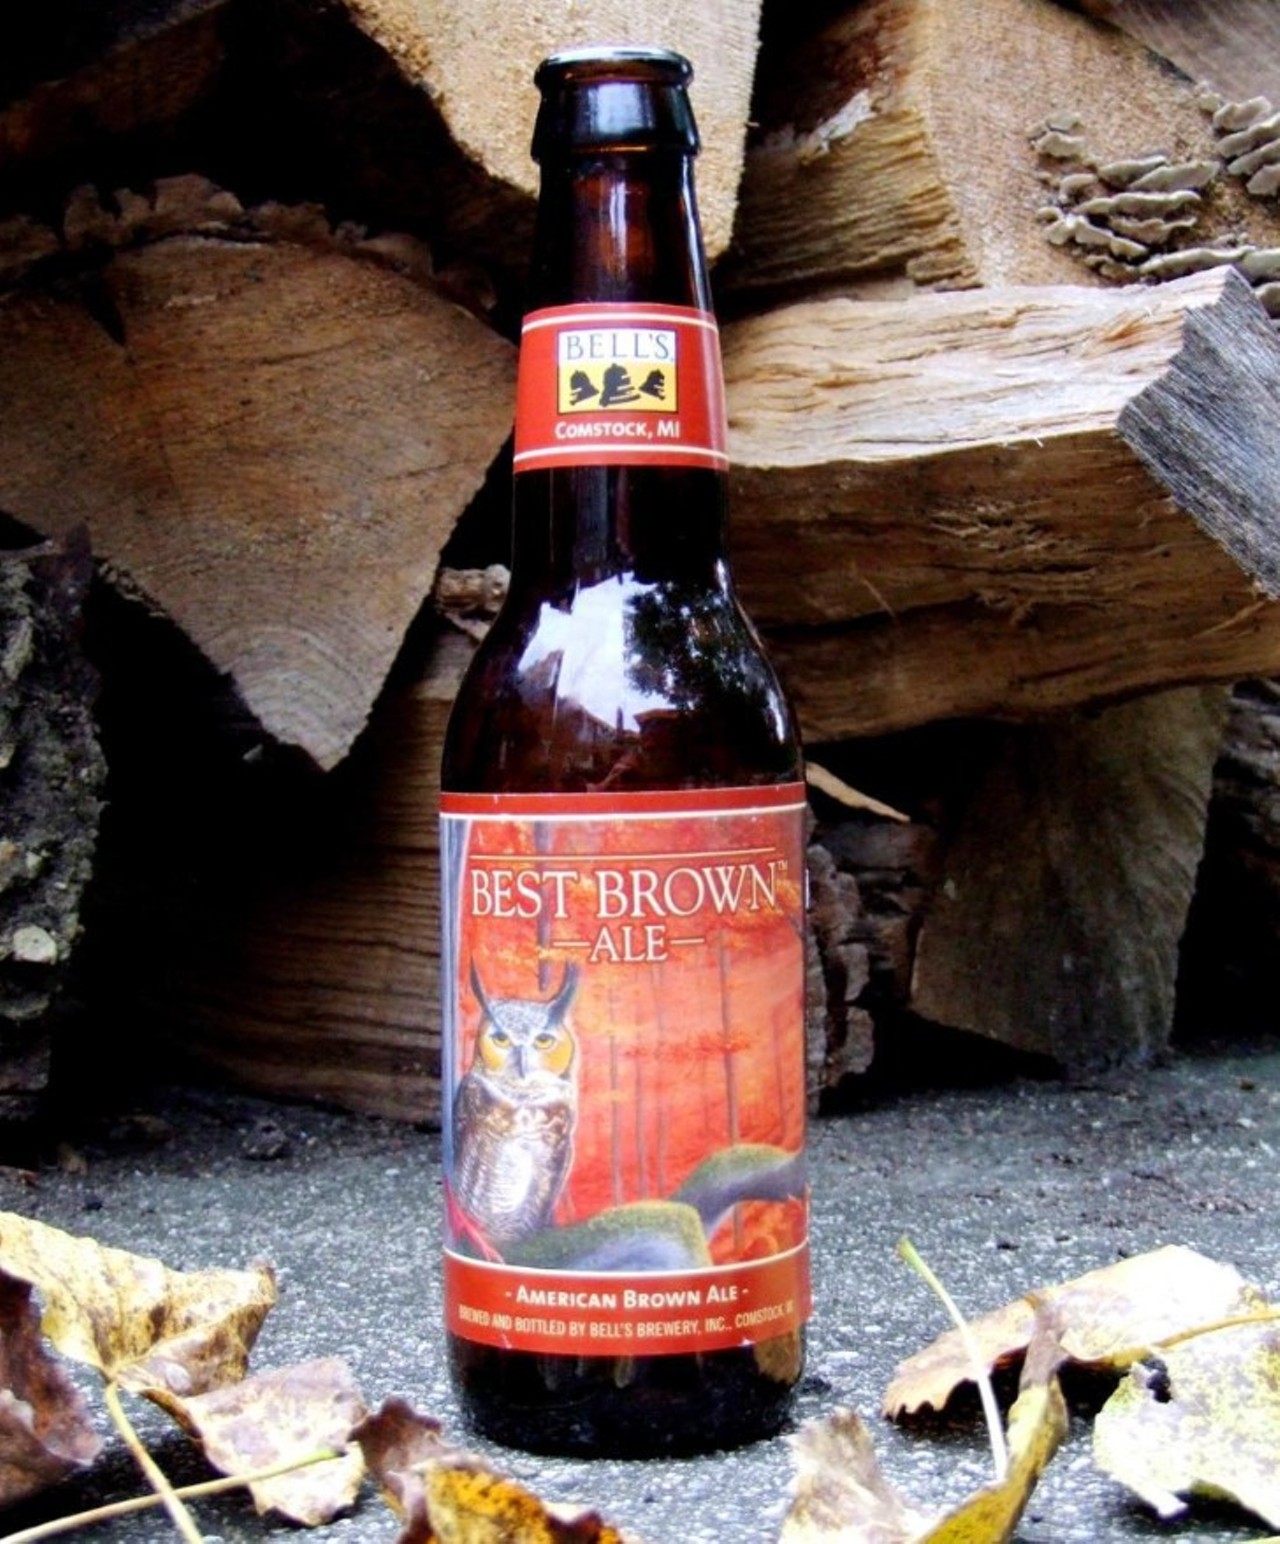 Bell&#146;s Best Brown Ale
Kalamazoo - 5.8%
You&#146;re go-to fall beer, Bell&#146;s Best Brown Ale is more full-bodied than a lager without the heaviness of a stout.
Photo courtesy of @davidnilsenbeer